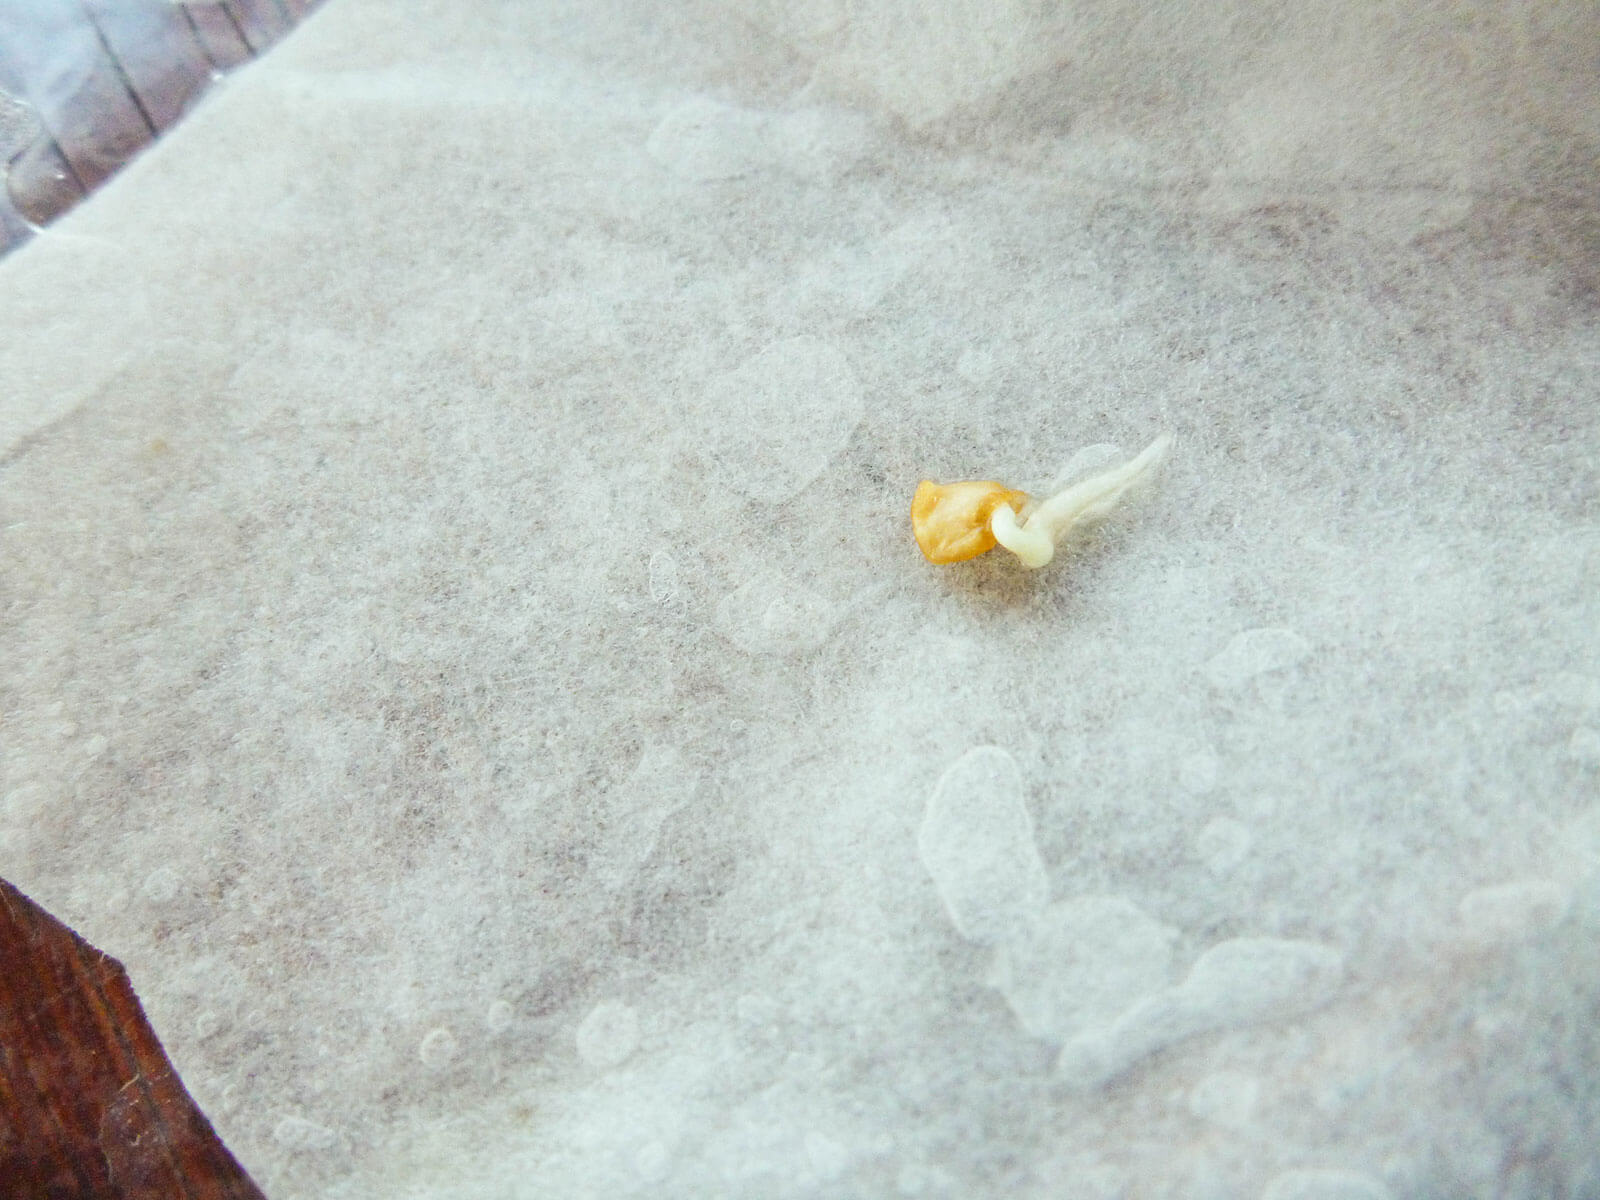 A sprouted seed using the baggie method